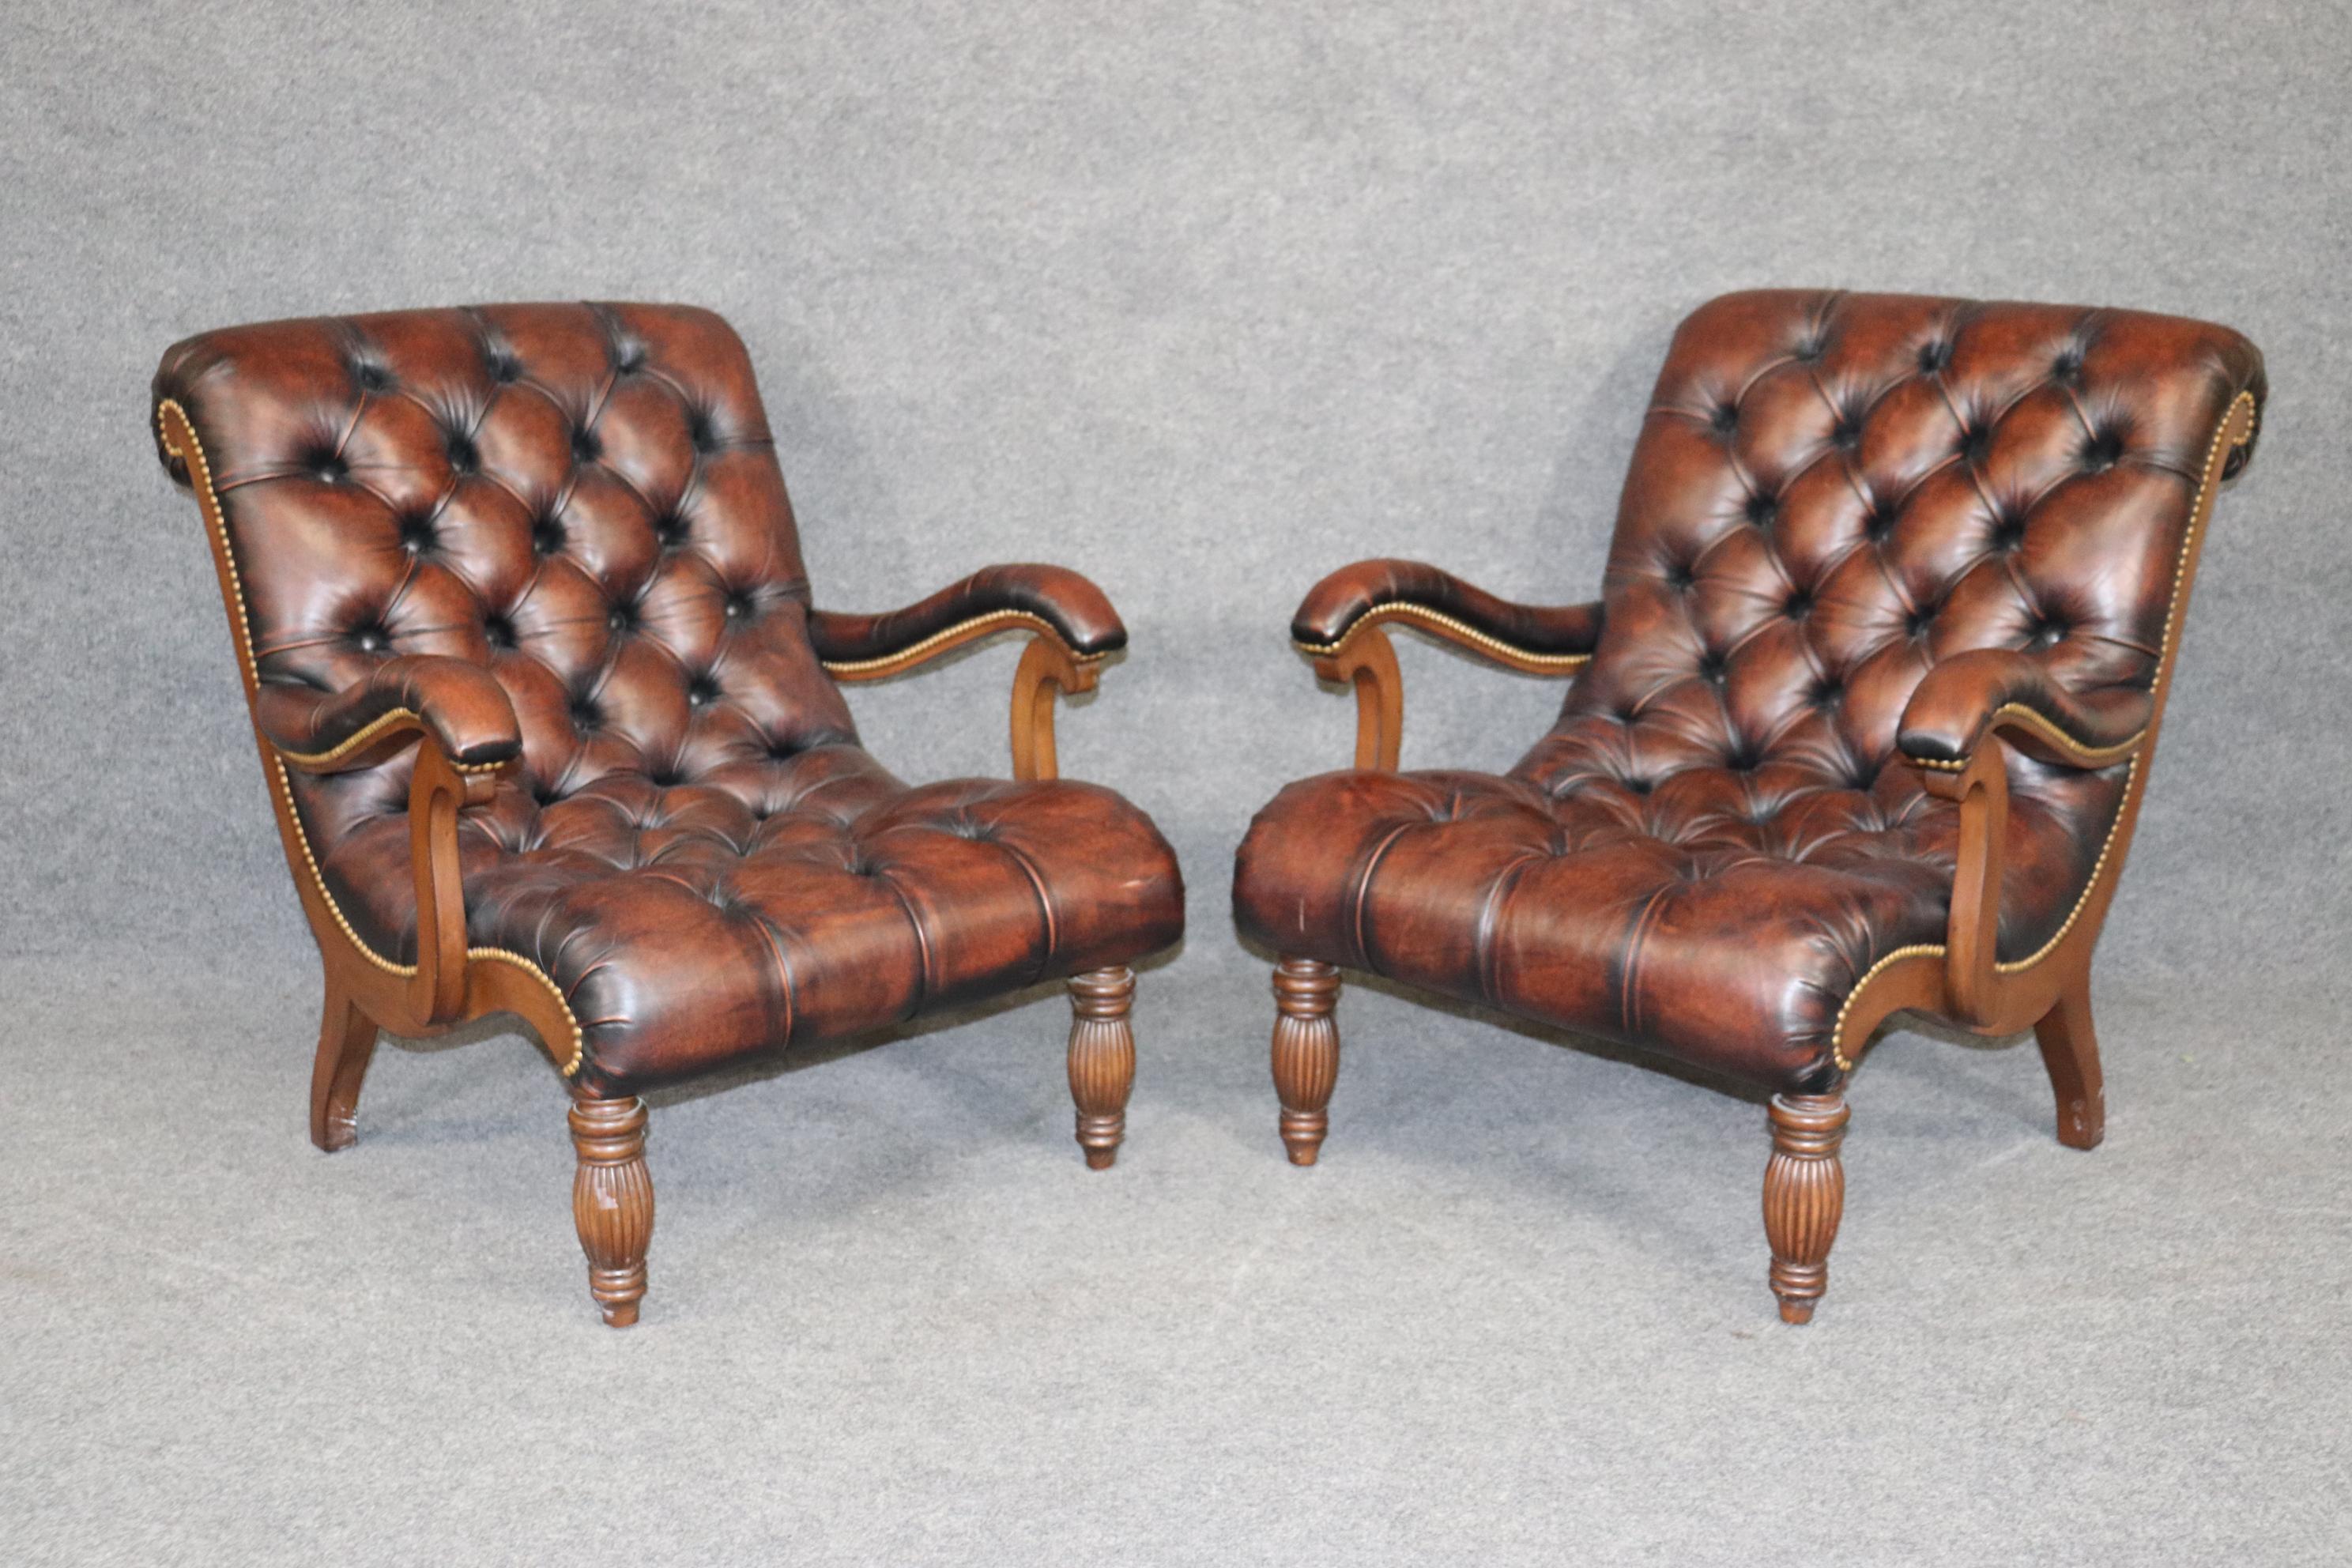 This is a 3 piece set including two large plantation chairs and a matching sharable ottoman.  The leather is beautifully antiqued to look like a 150 year old campeche set. The leather is in very good condition and has no major issues or damages or